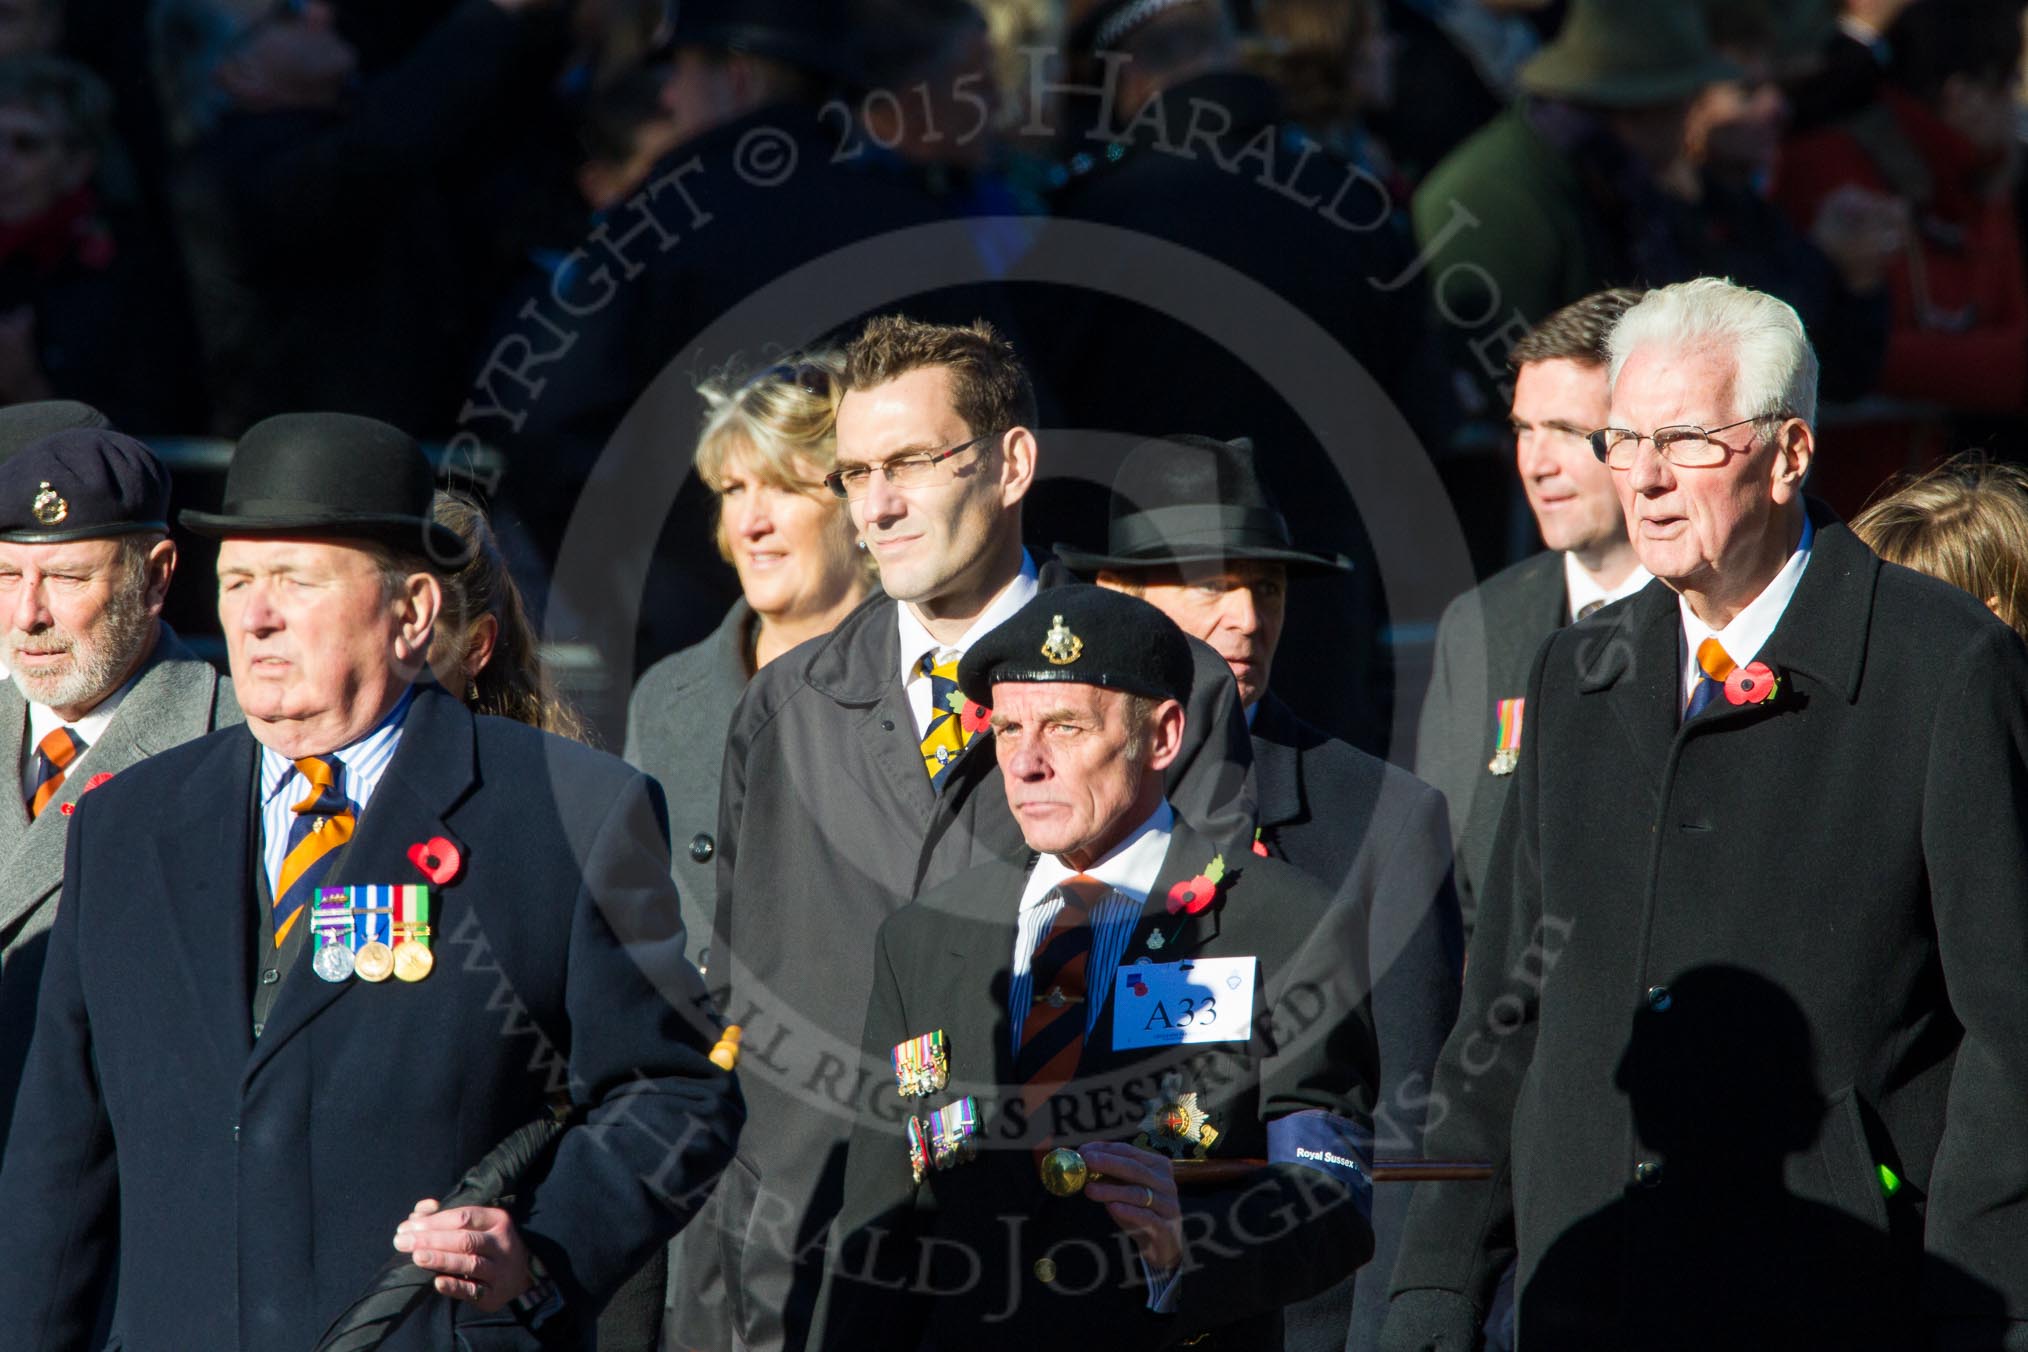 Remembrance Sunday Cenotaph March Past 2013: A33 - Royal Sussex Regimental Association..
Press stand opposite the Foreign Office building, Whitehall, London SW1,
London,
Greater London,
United Kingdom,
on 10 November 2013 at 11:58, image #1288